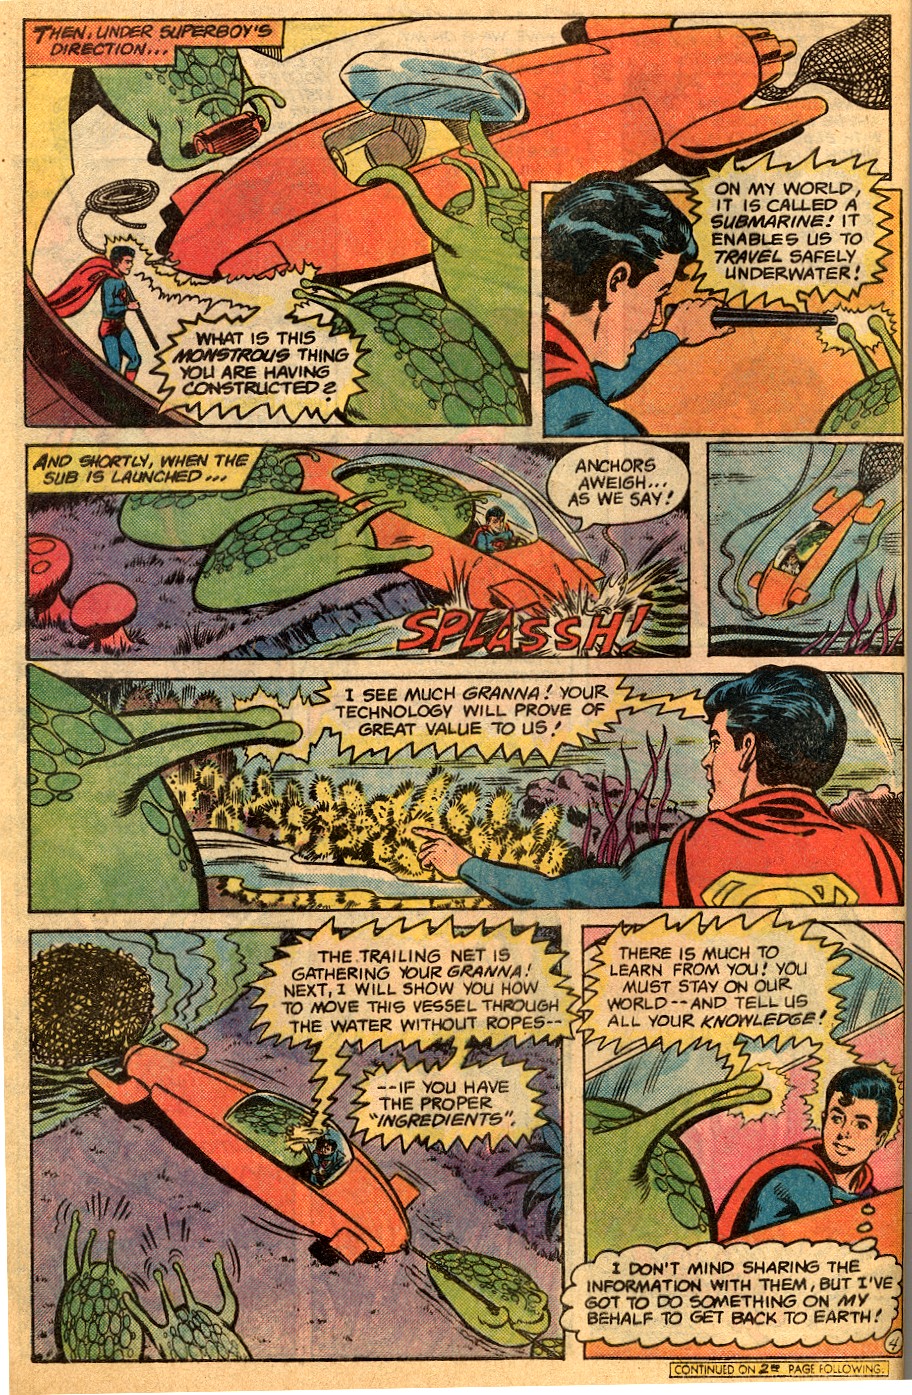 The New Adventures of Superboy 21 Page 27